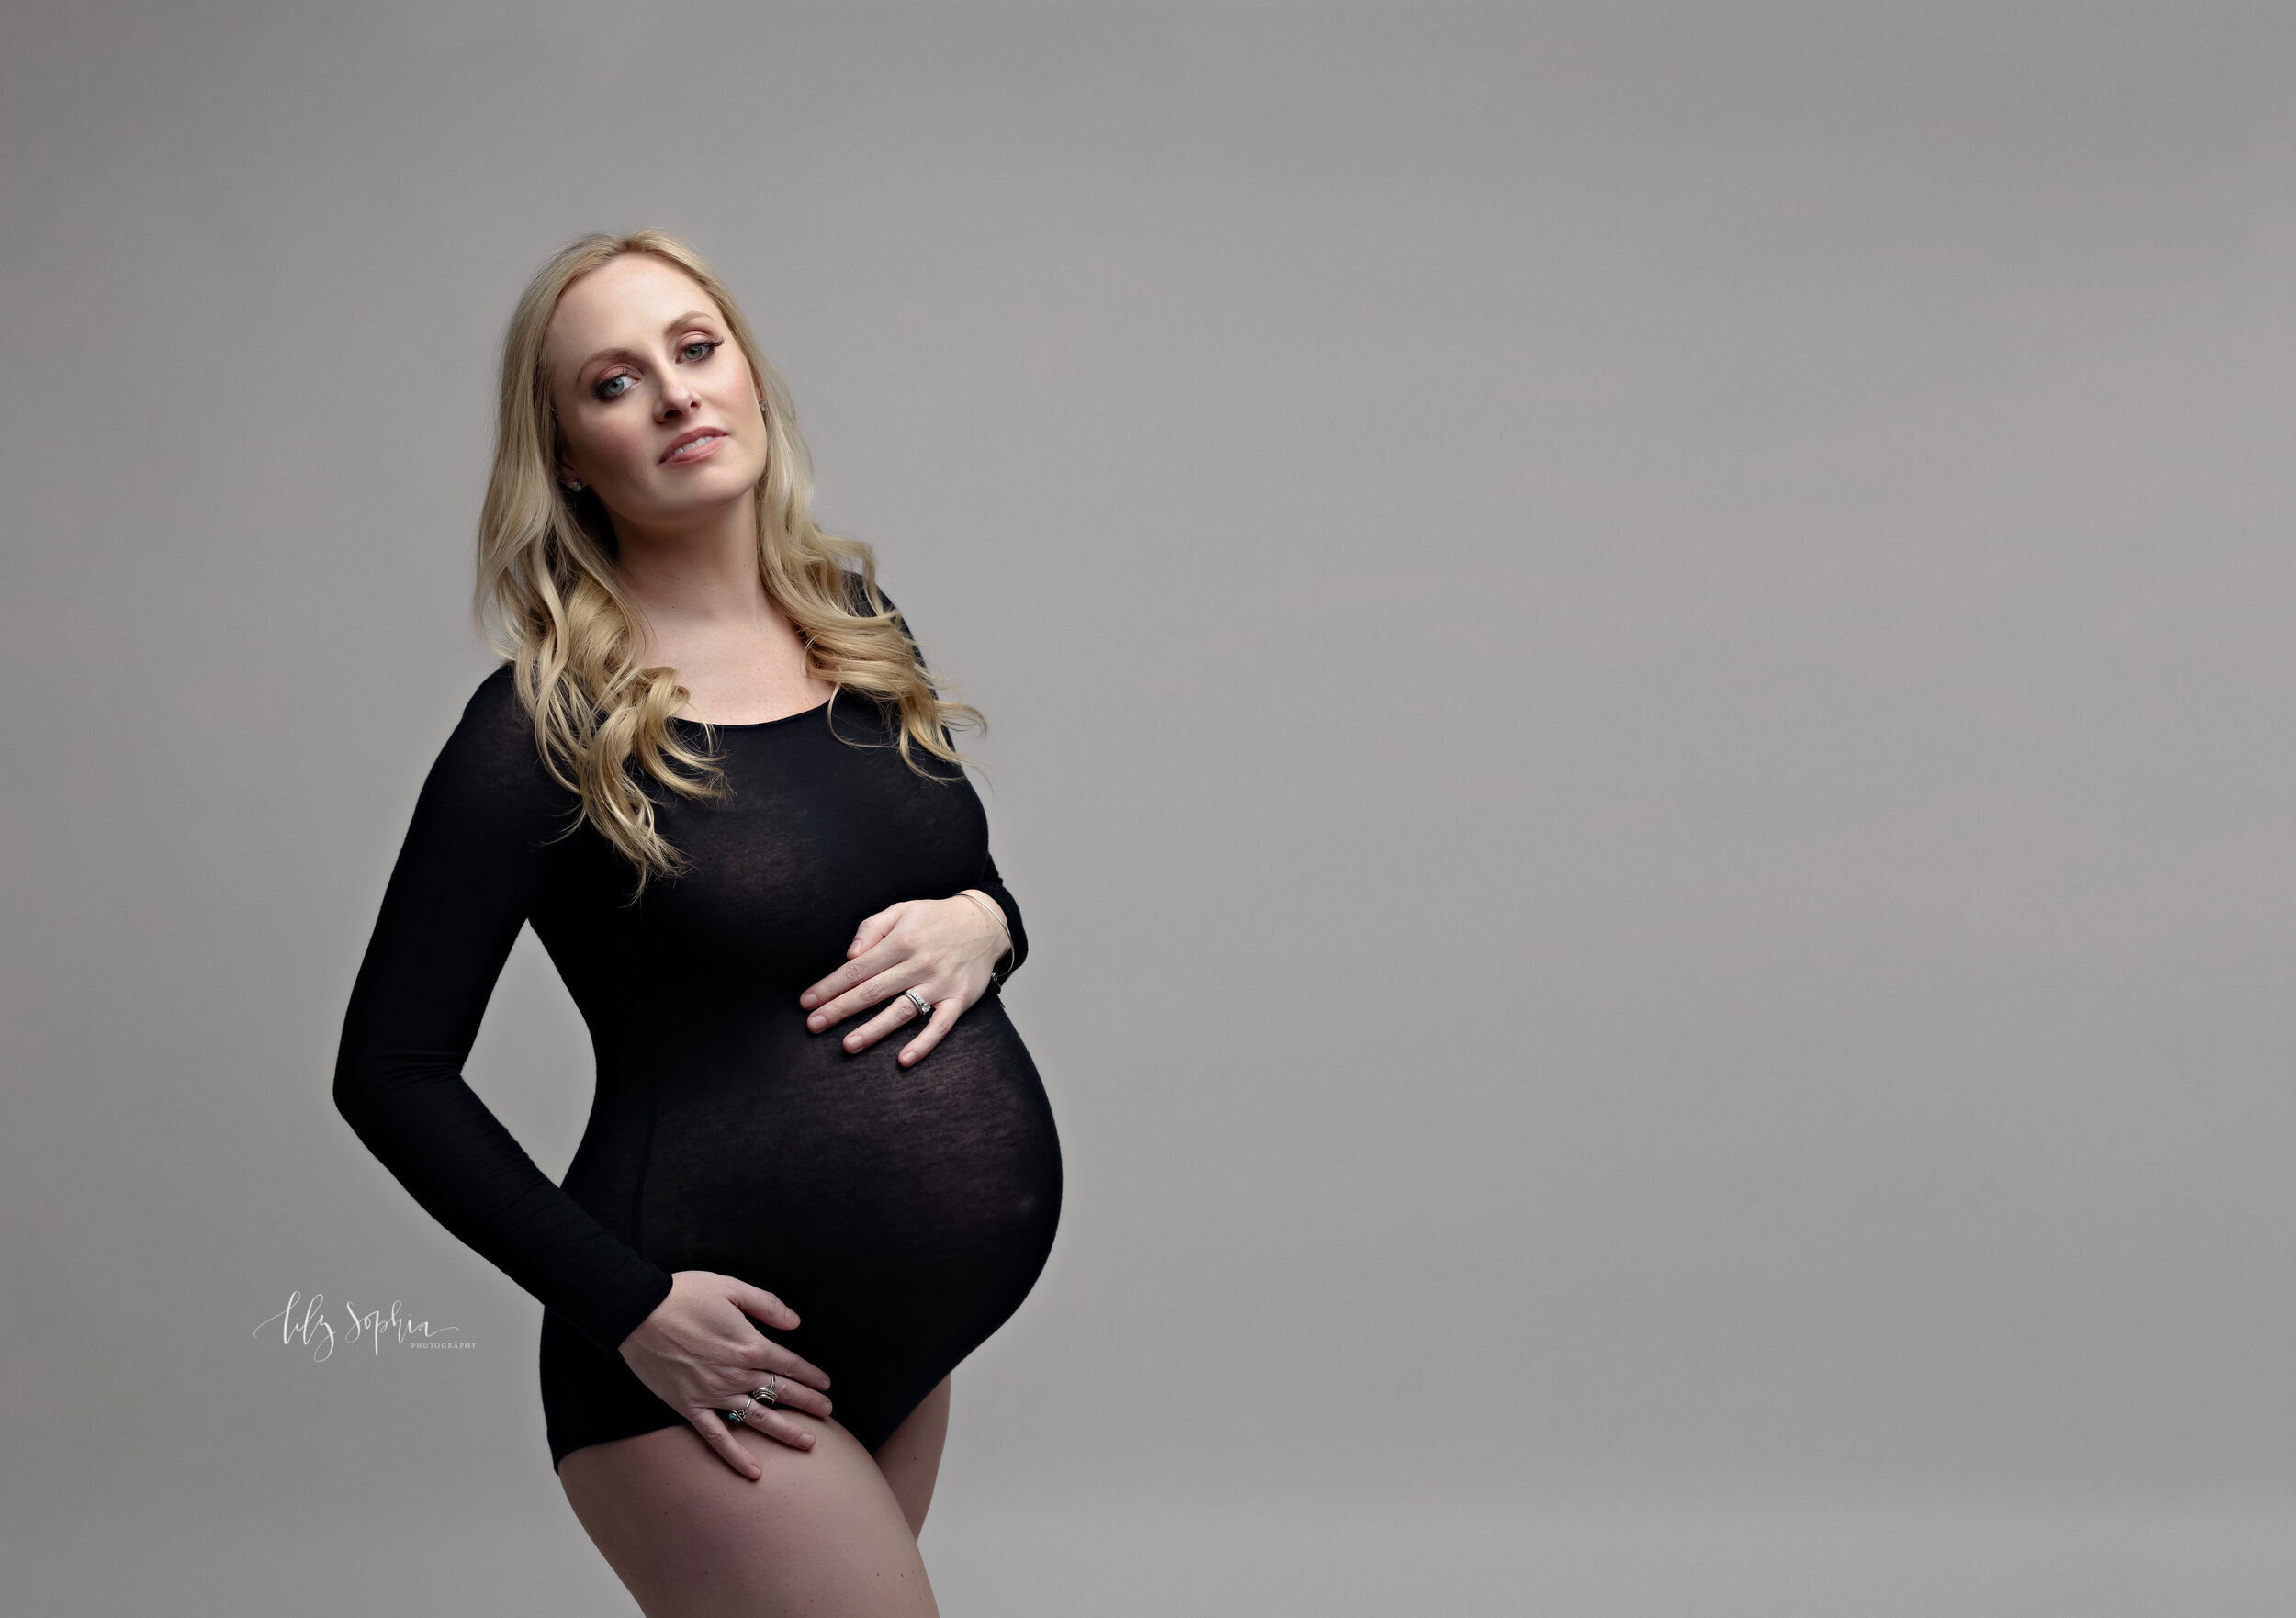  Color  editorial maternity fine art image of powerful 37 weeks pregnant woman with long blonde hair dressed in black bodysuit against  a gray background in the metro Atlanta area studio of Lily Sophia Photography.  